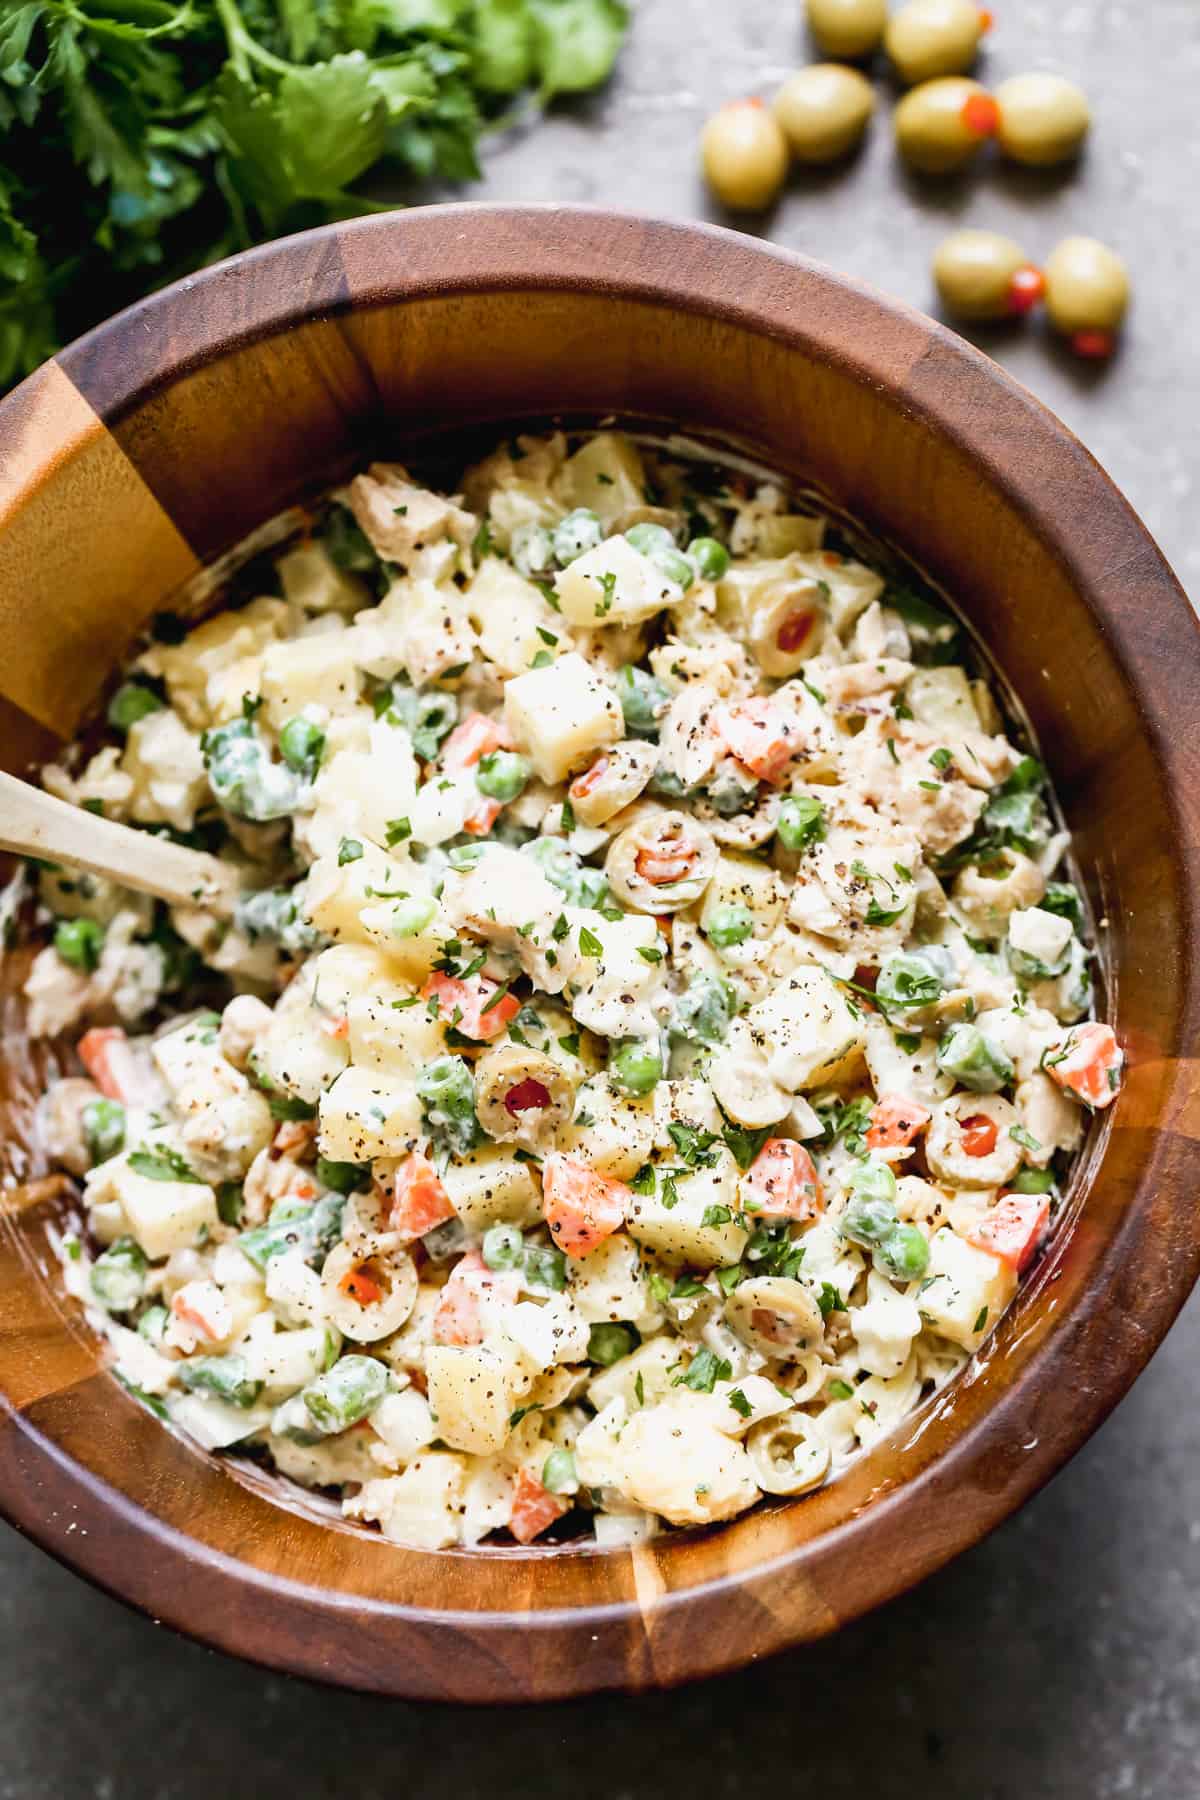 A wooden bowl filled with an easy Ensalada Rusa pasta salad.